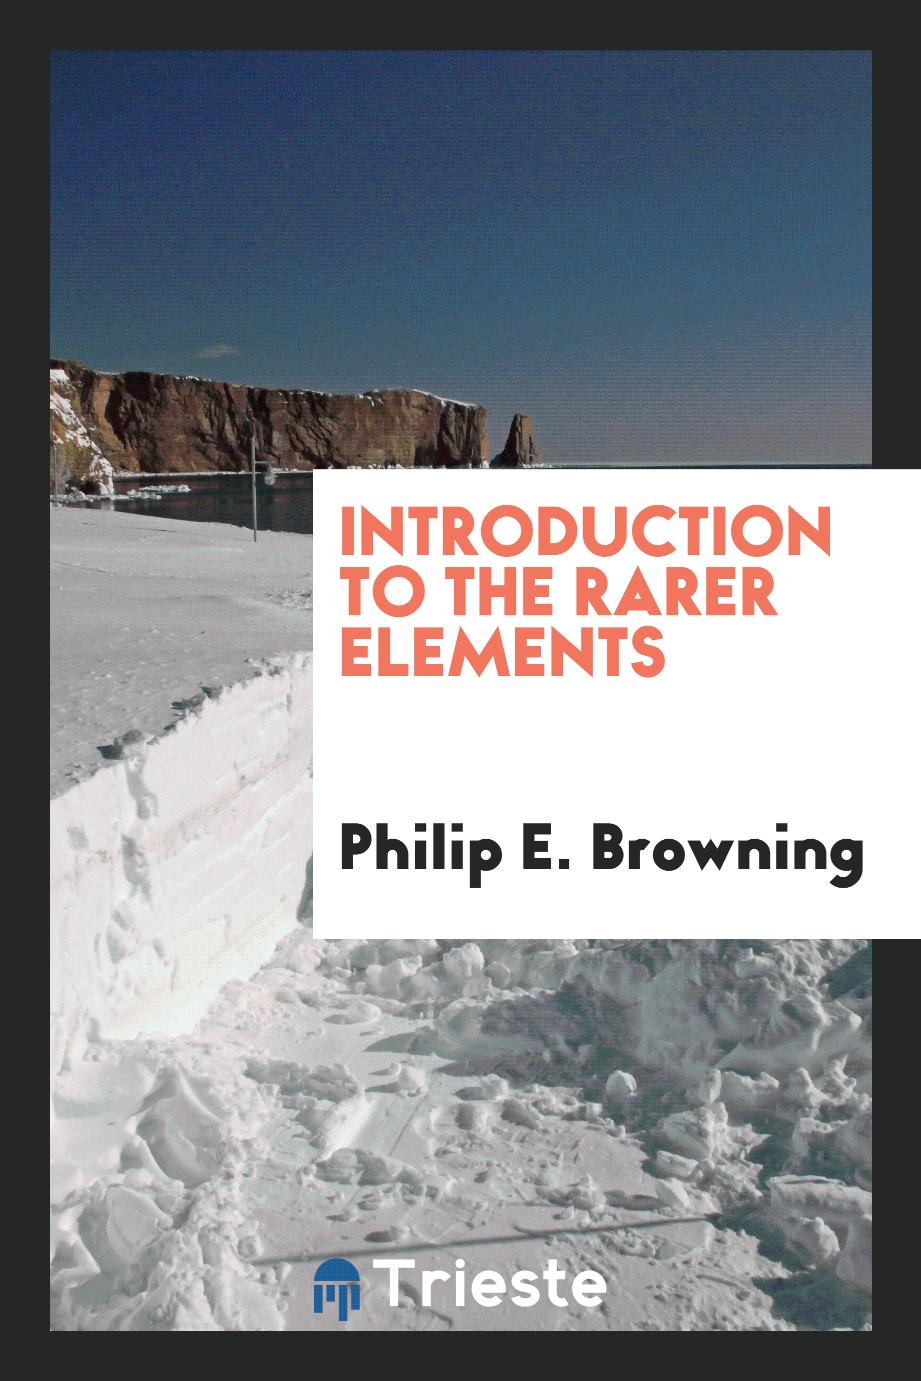 Introduction to the rarer elements